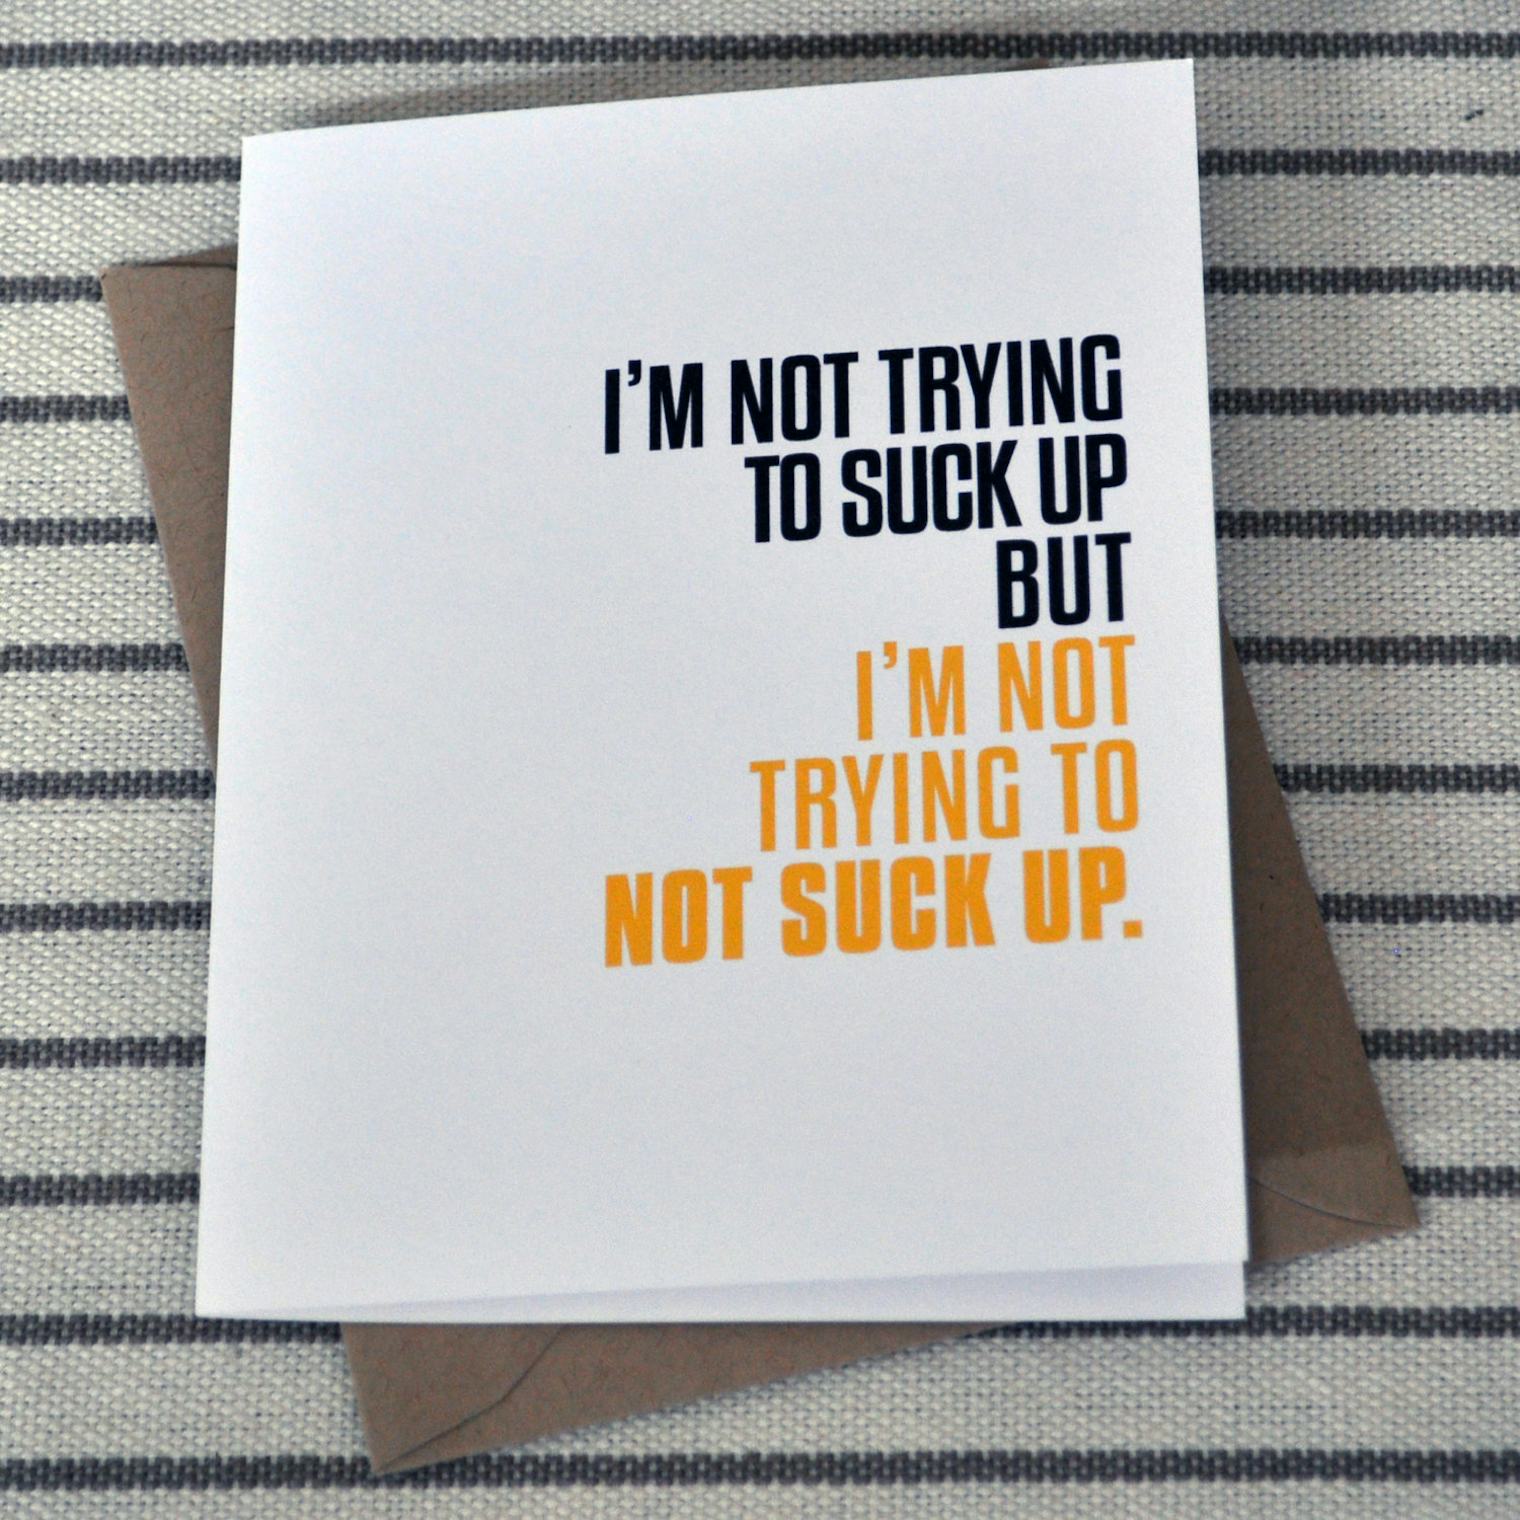 world-s-best-boss-and-employees-funny-boss-s-day-card-from-us